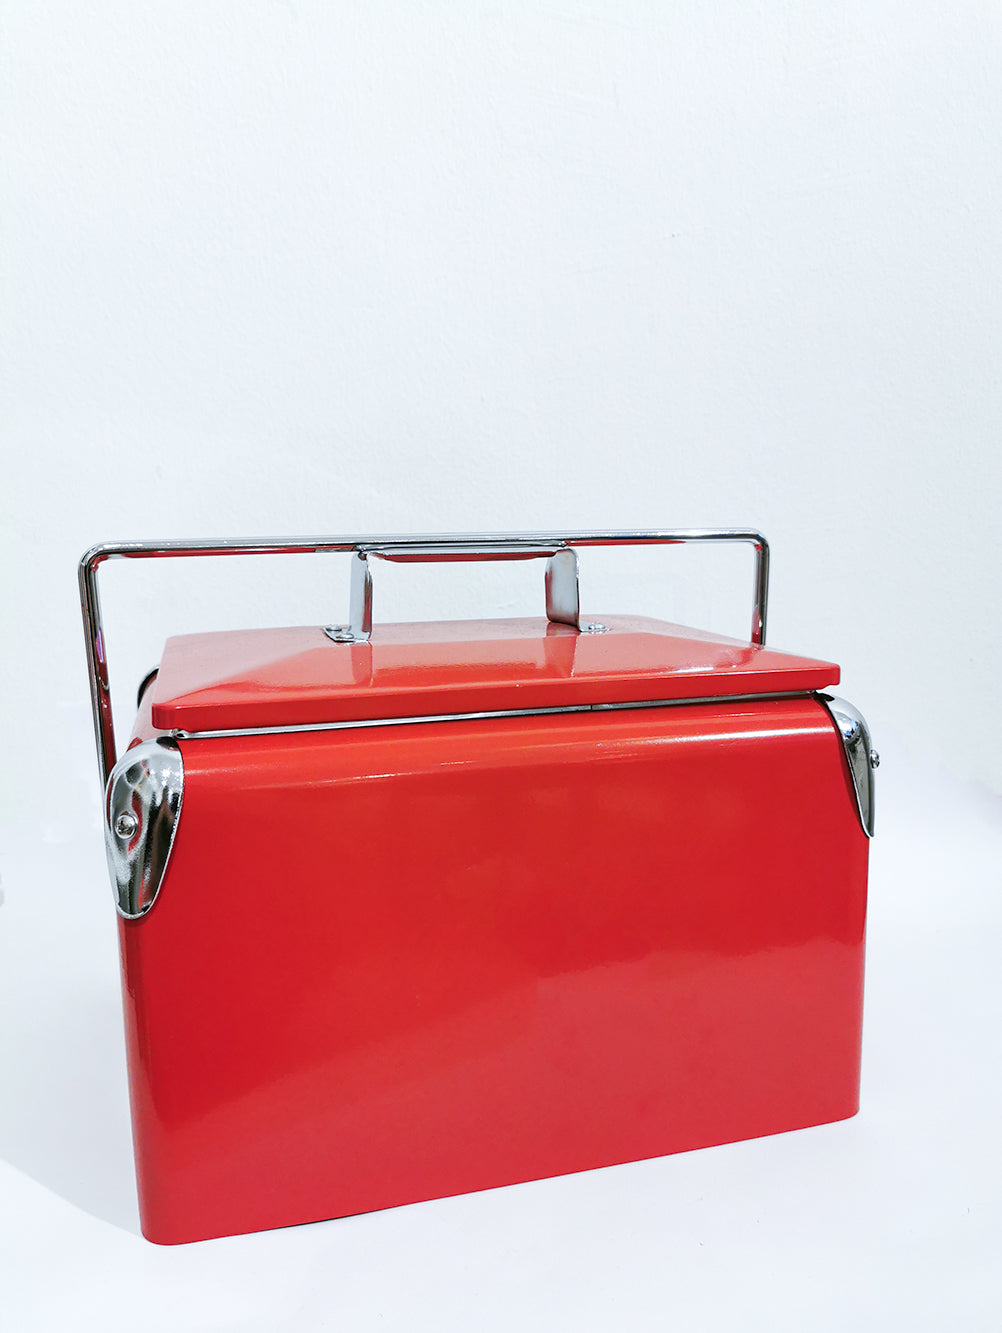 Grosseto Thermal Box - Red - Gifts by Art Tree